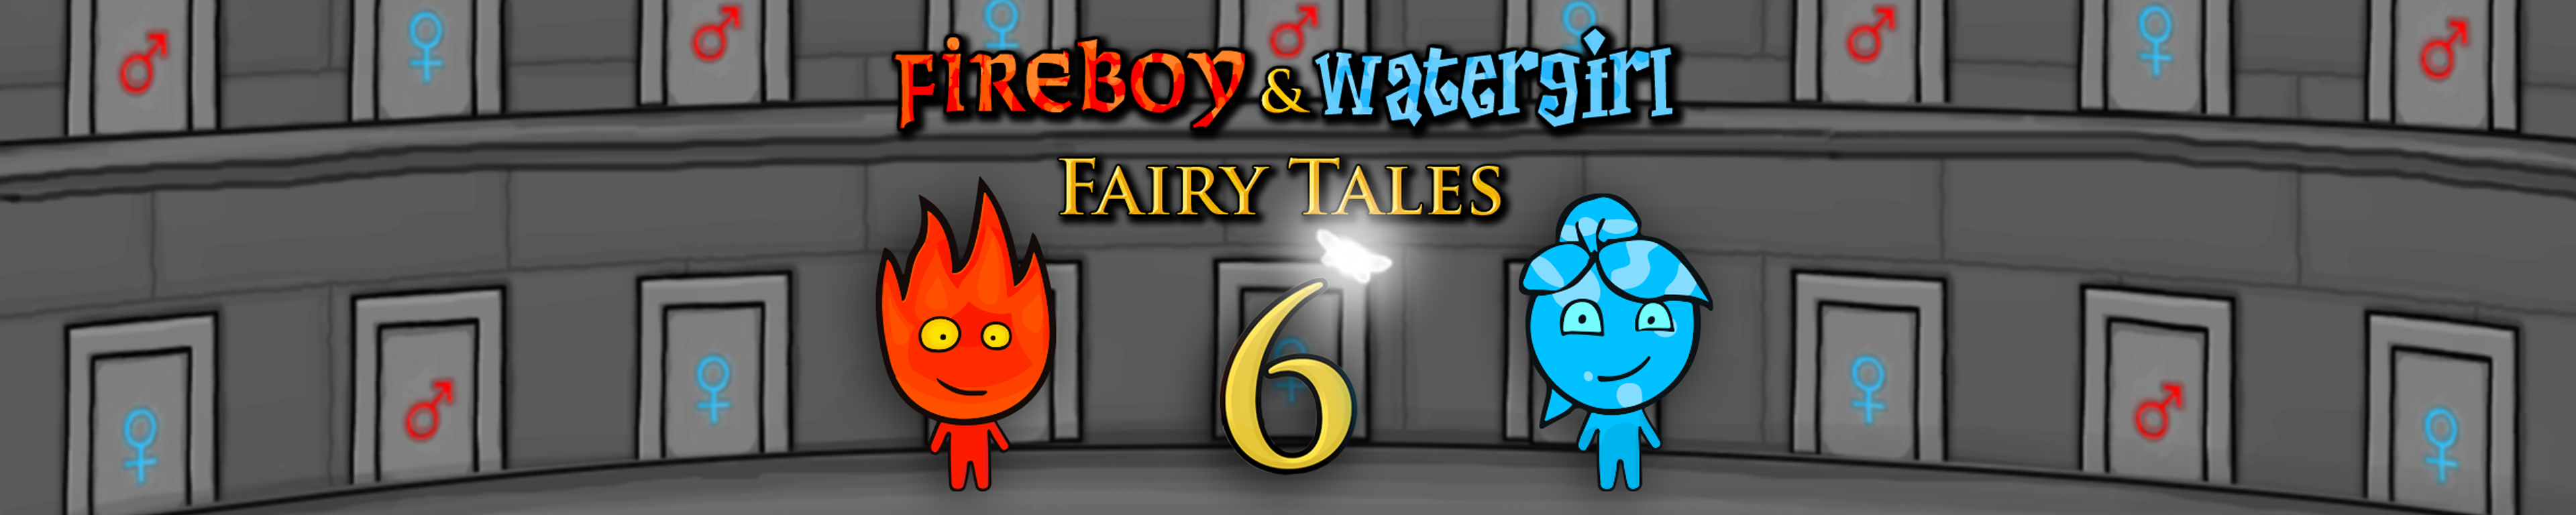 Fireboy and Watergirl 6: Fairy Tales 